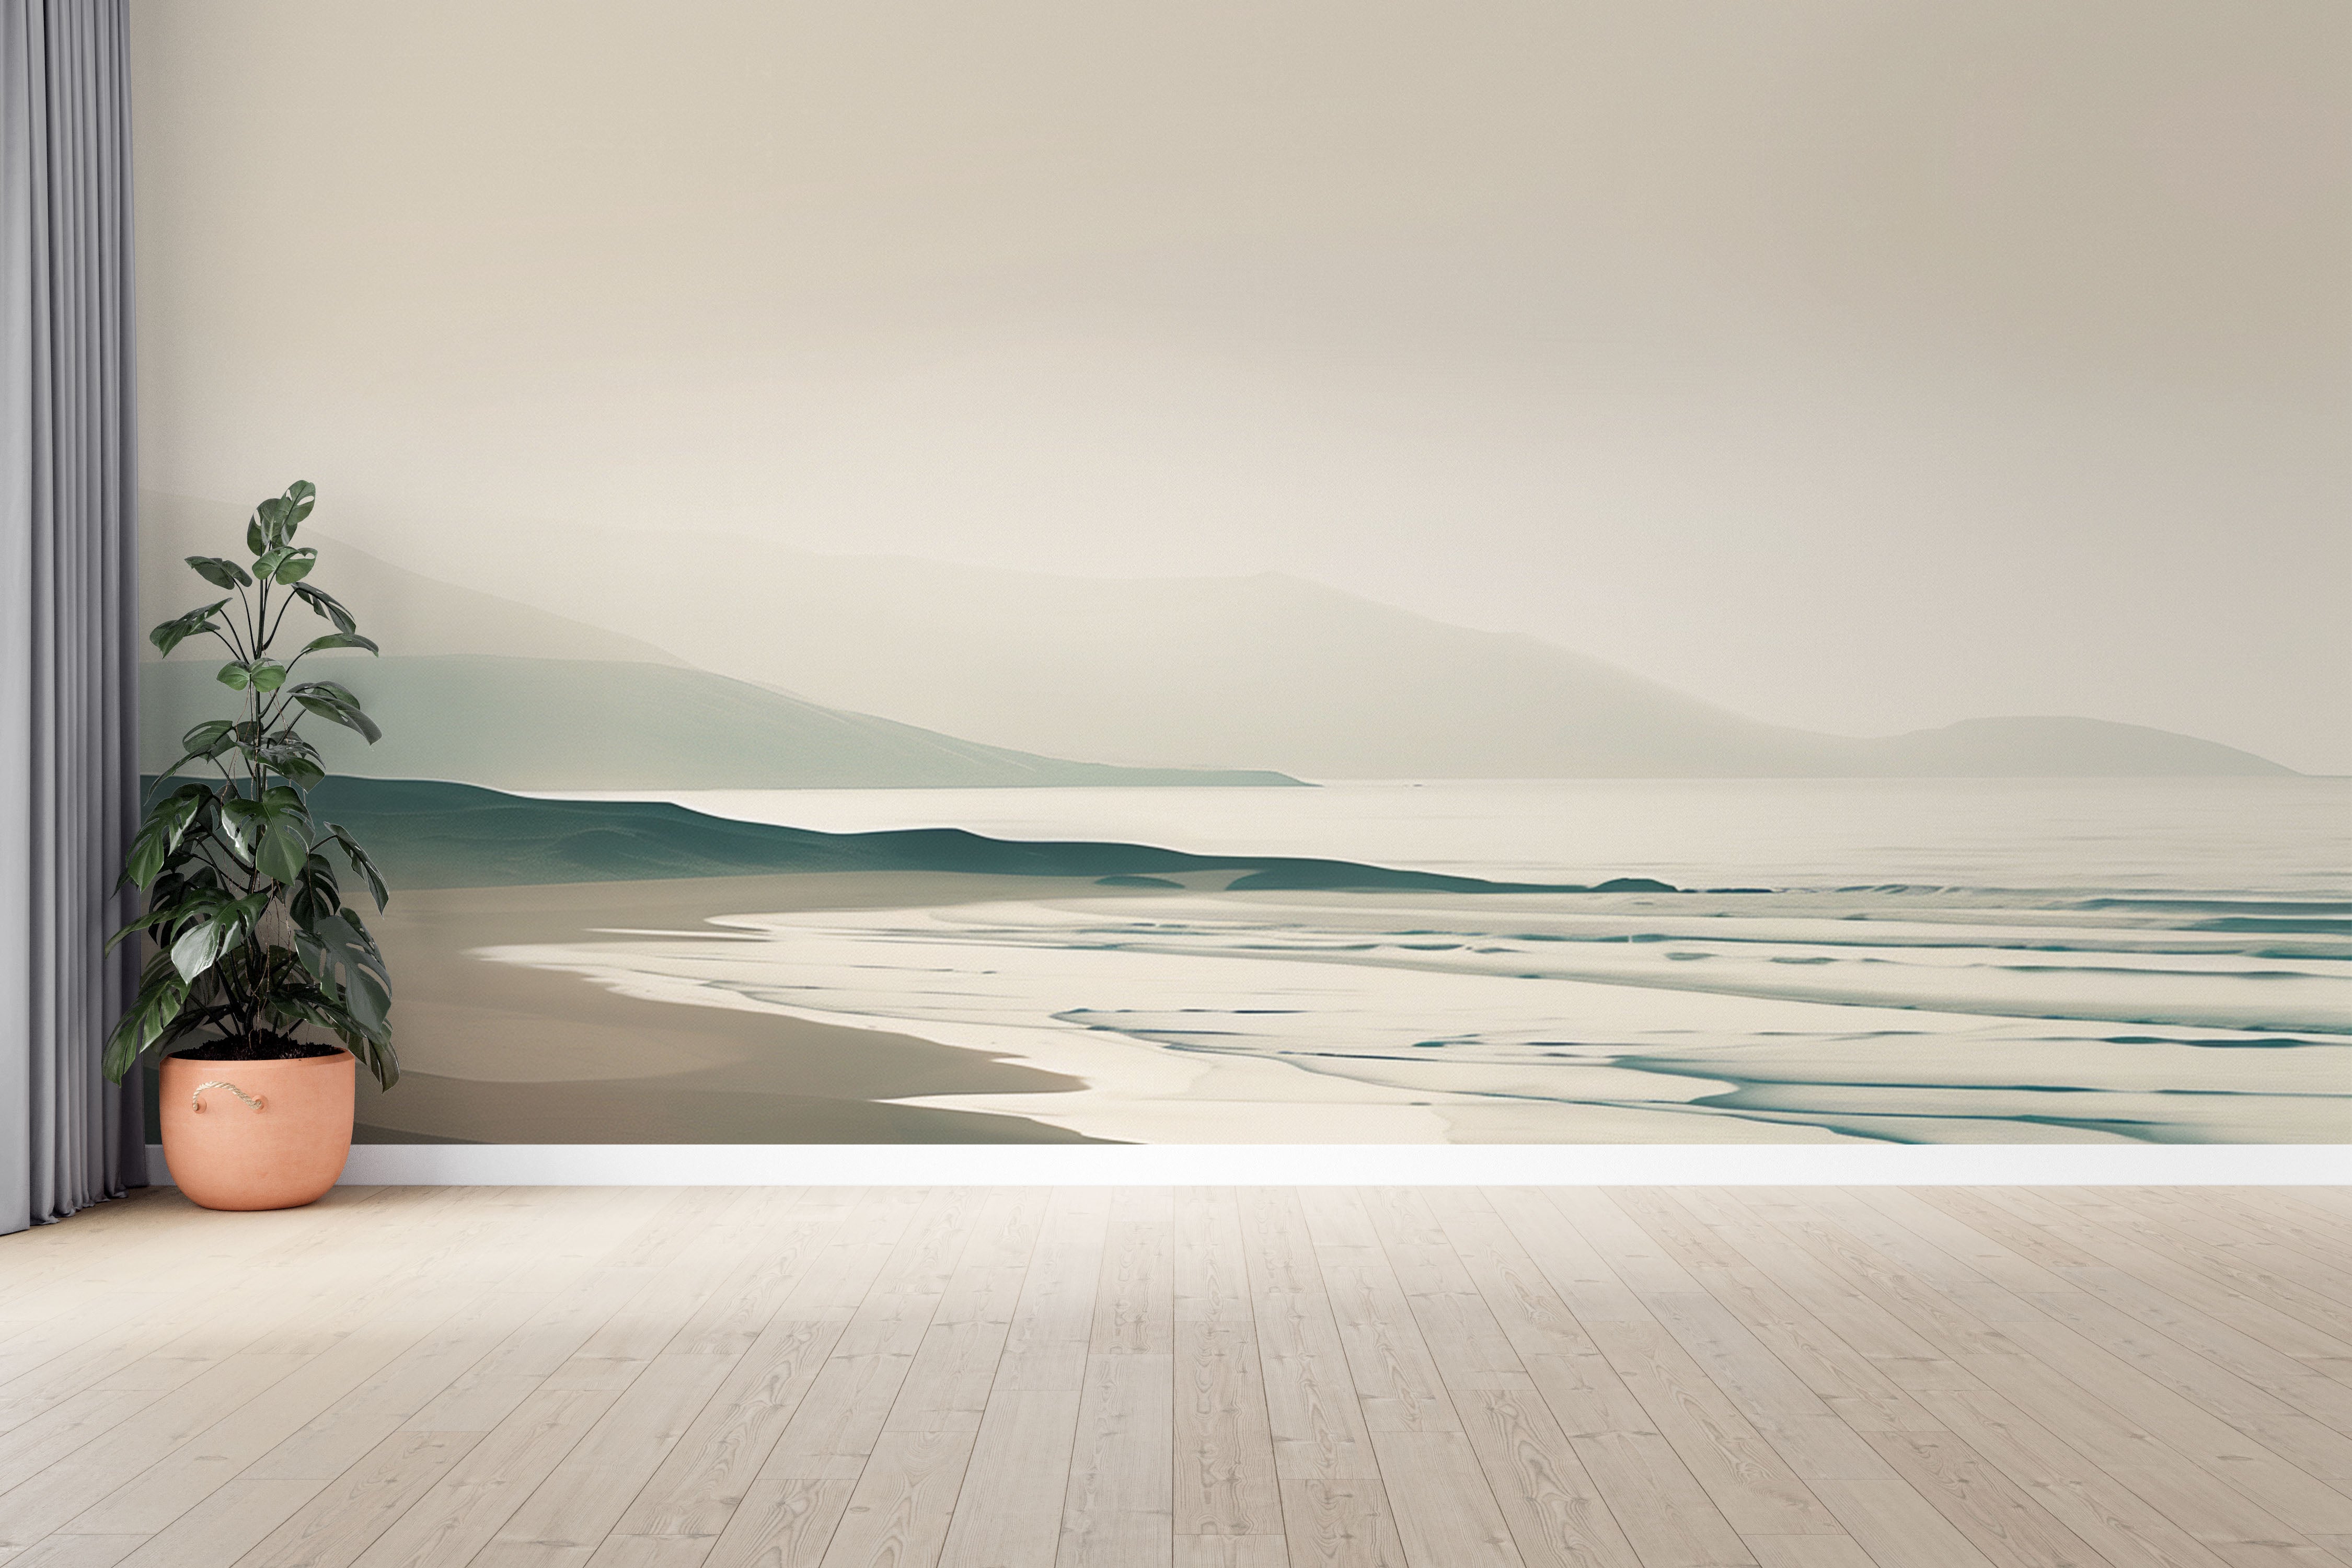 Facing the Ocean – Beach and Mountains Wallpaper in Mist